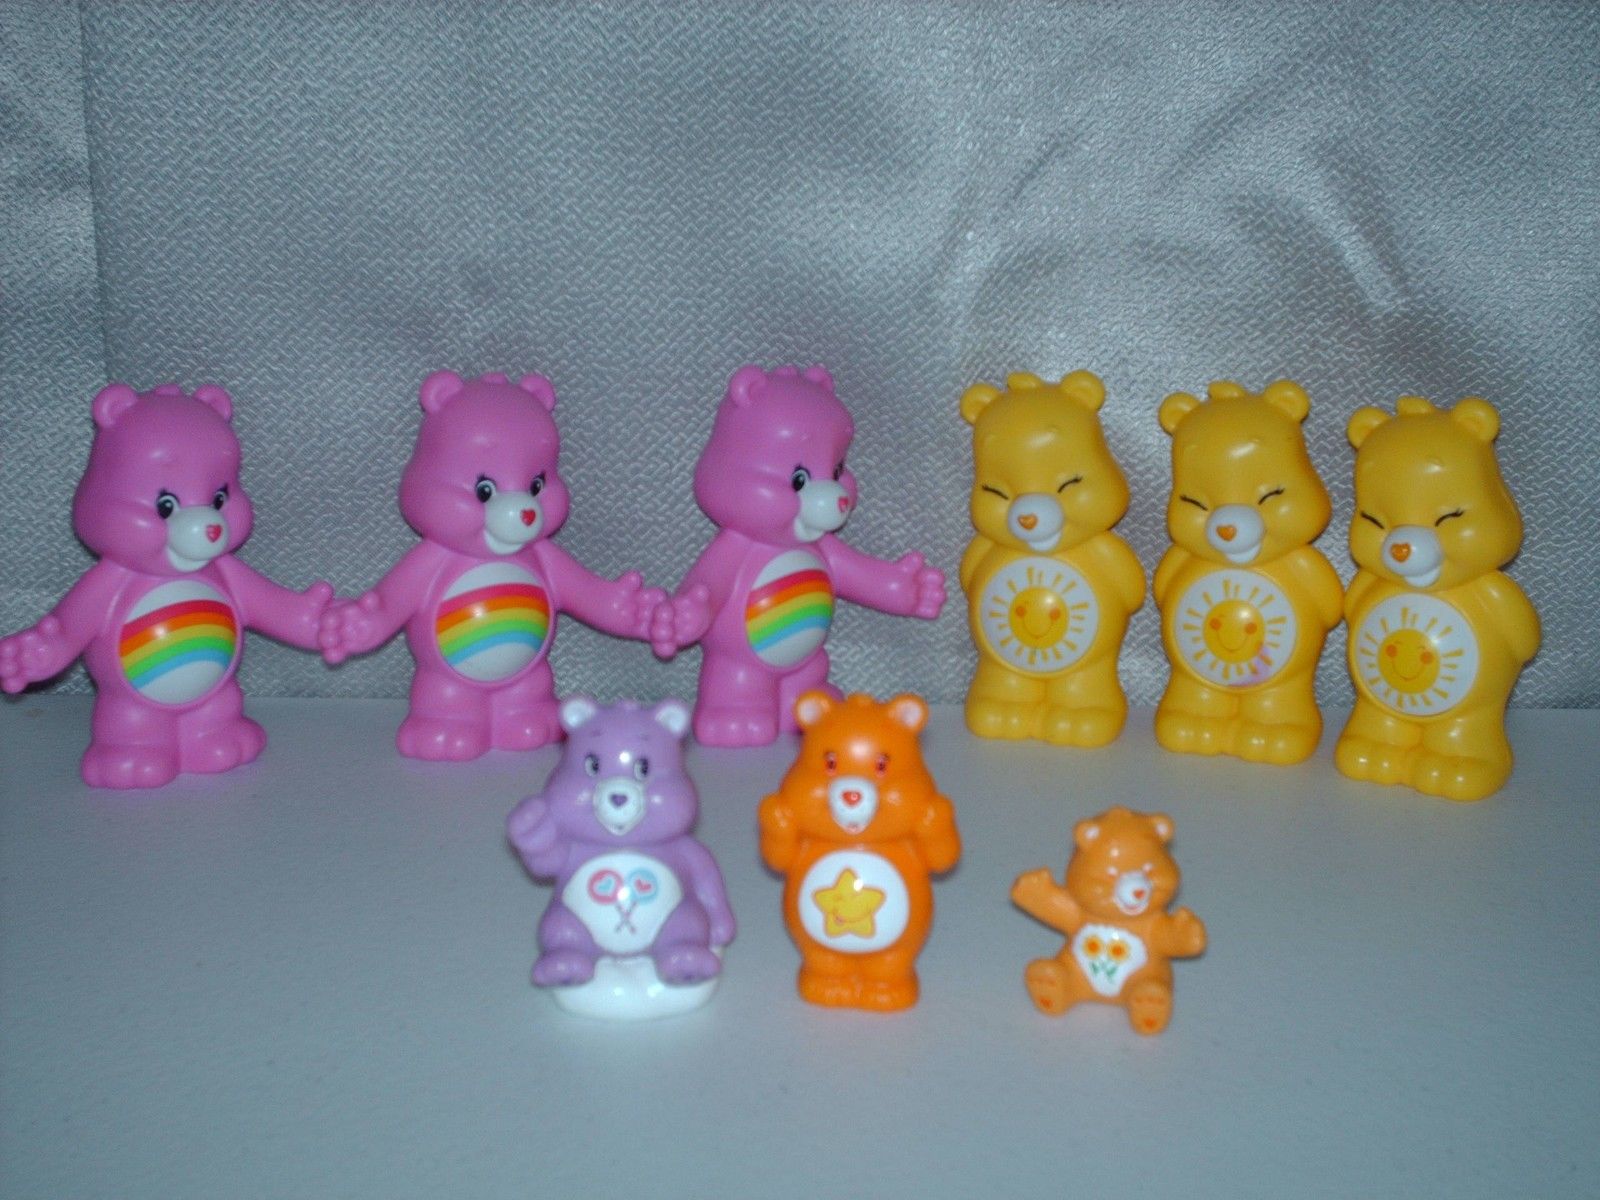 MIXED Lot Of 9 Care Bear Mini RUBBER & PLASTIC Toys - UP TO 4